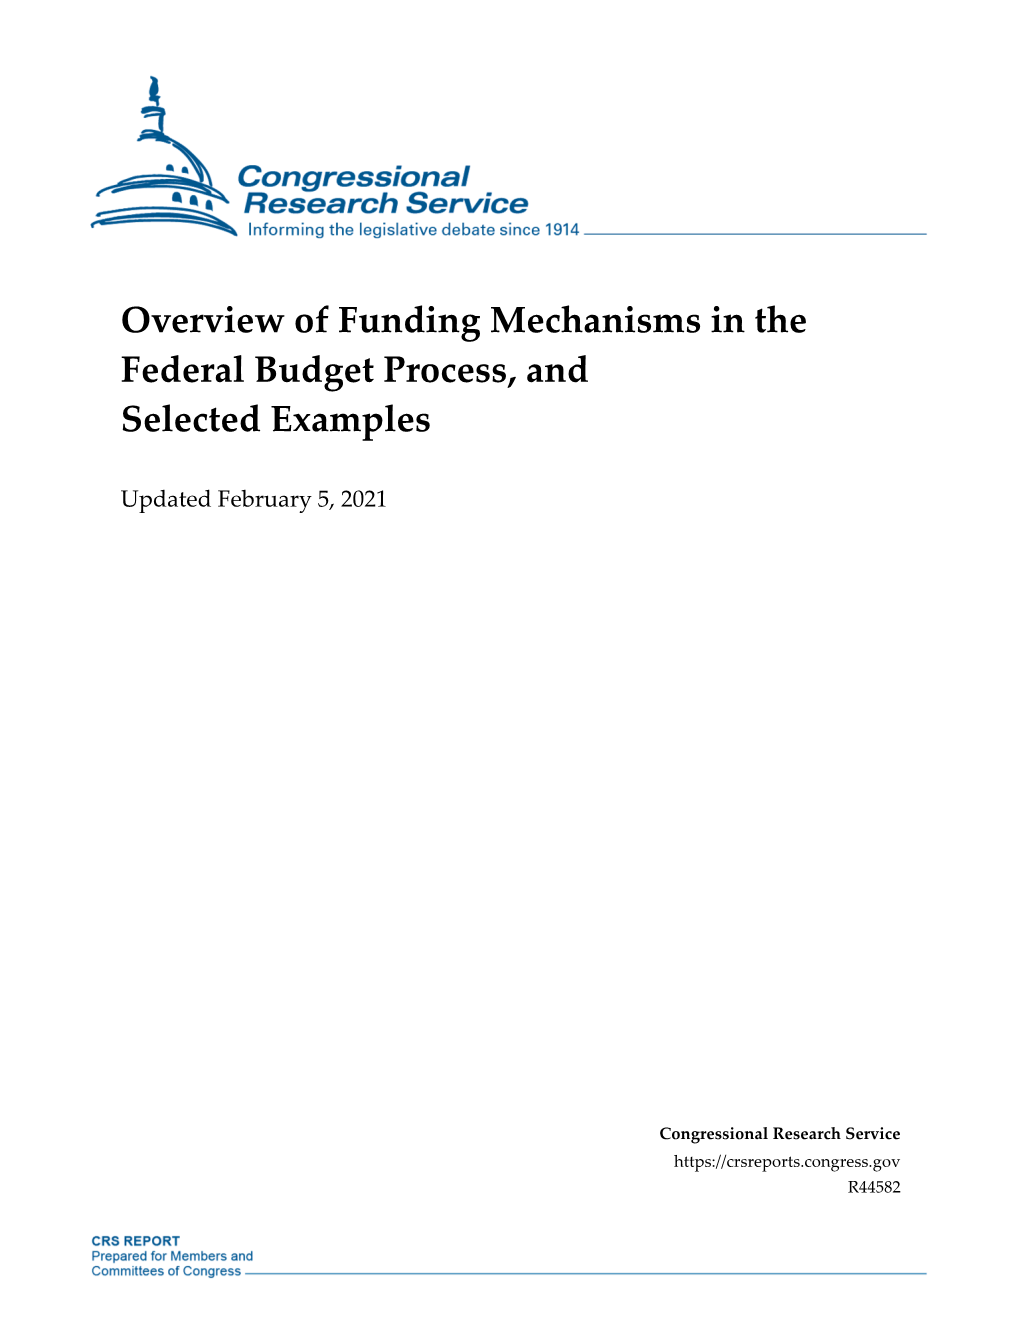 Overview of Funding Mechanisms in the Federal Budget Process, and Selected Examples